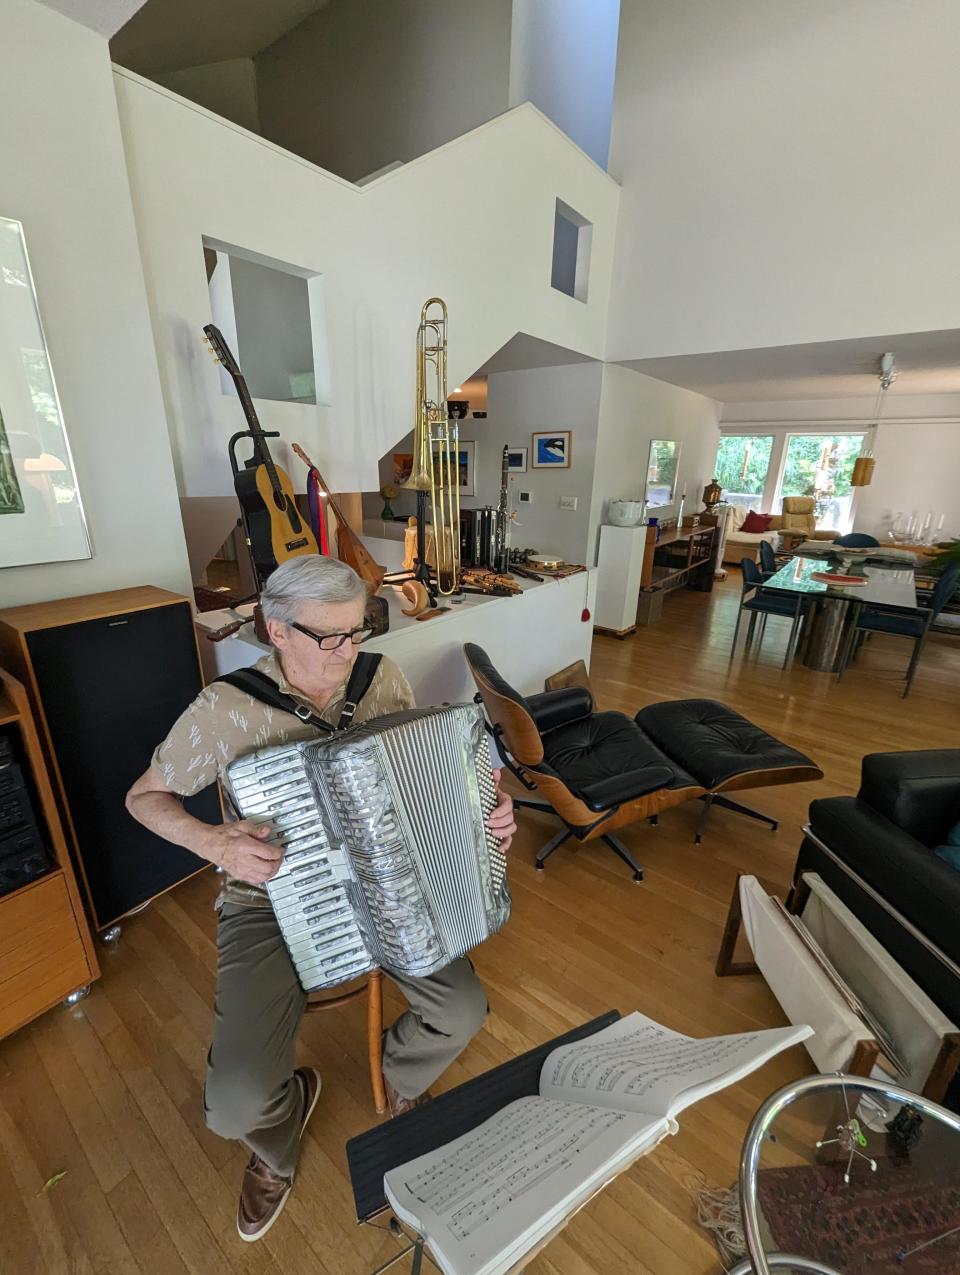 Bill Nowysz practices his accordion in the interesting home he designed in the 1970s. As seen in the background, he also enjoys collecting musical instruments.